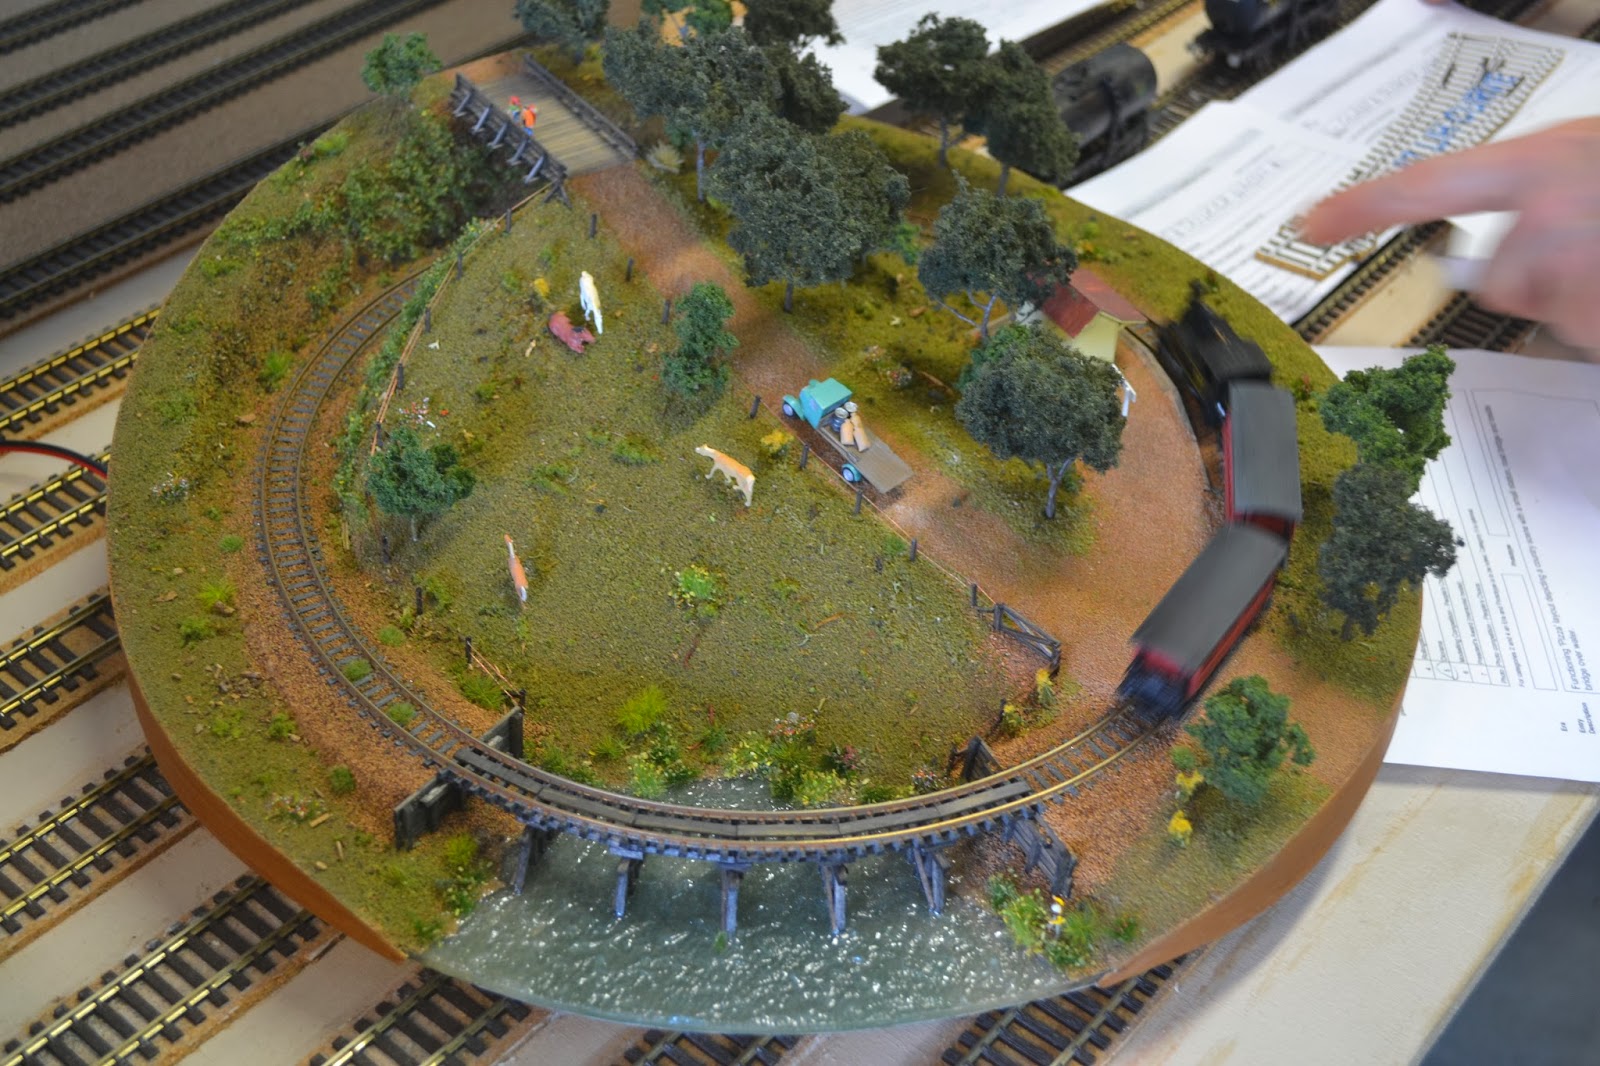 This small N scale diorama was an entry in the modelling competition 